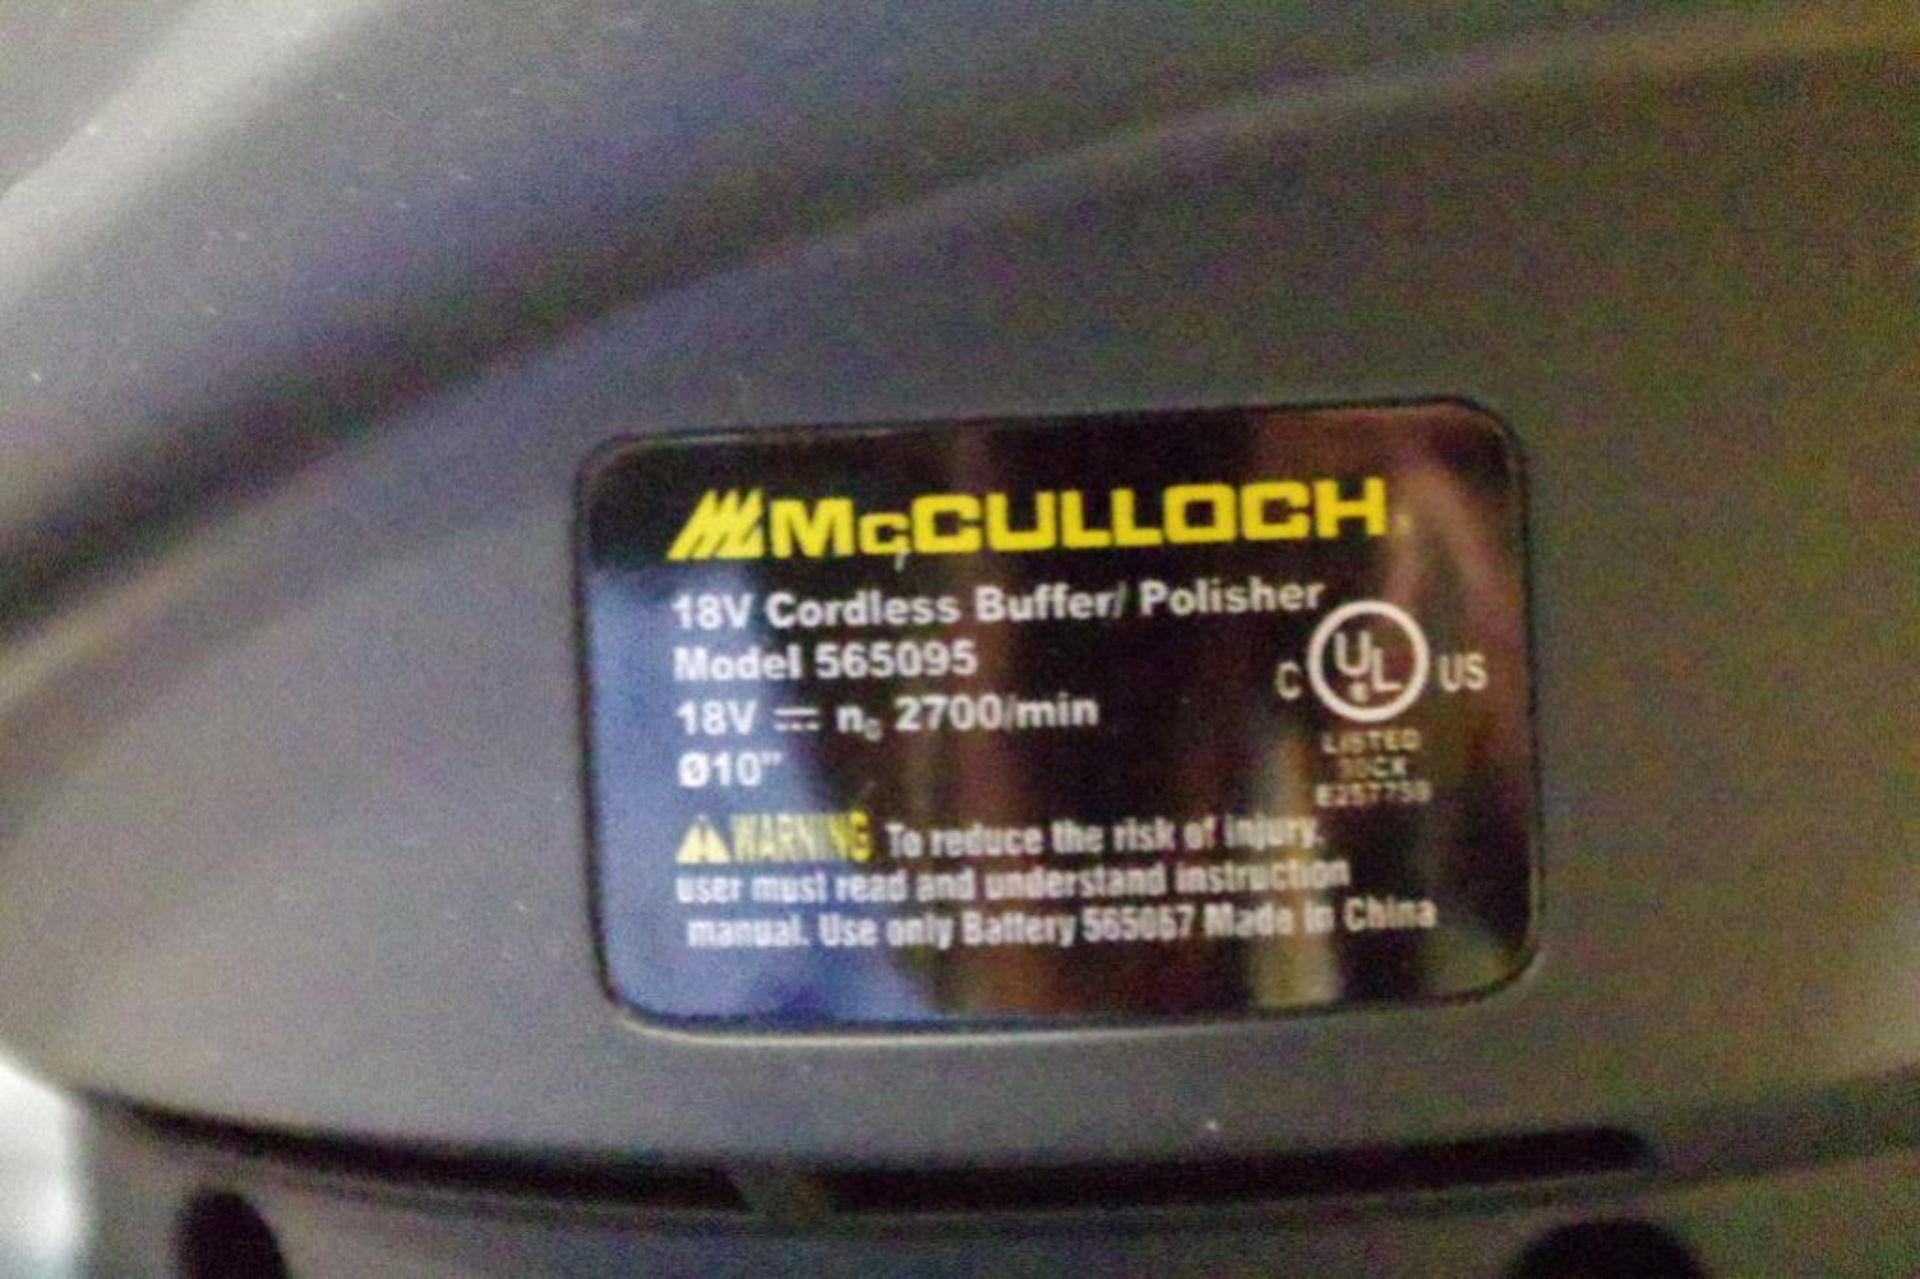 [4] NEW McCULLOCH 18V Cordless Buffer/Polisher (NO Batteries, NO Chargers) - Image 3 of 3